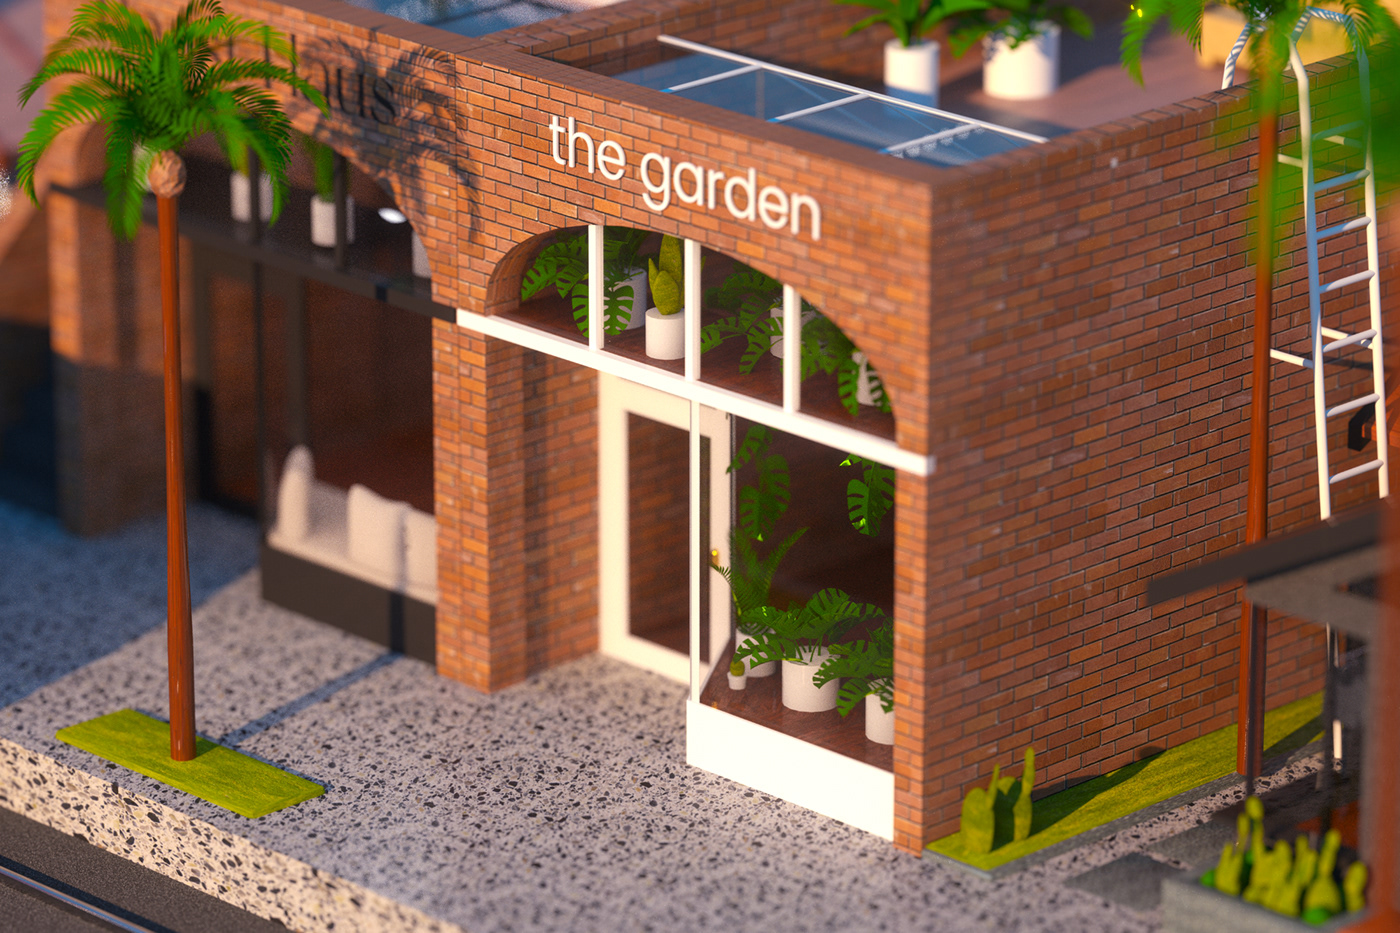 3D render of a plan store in a brick building